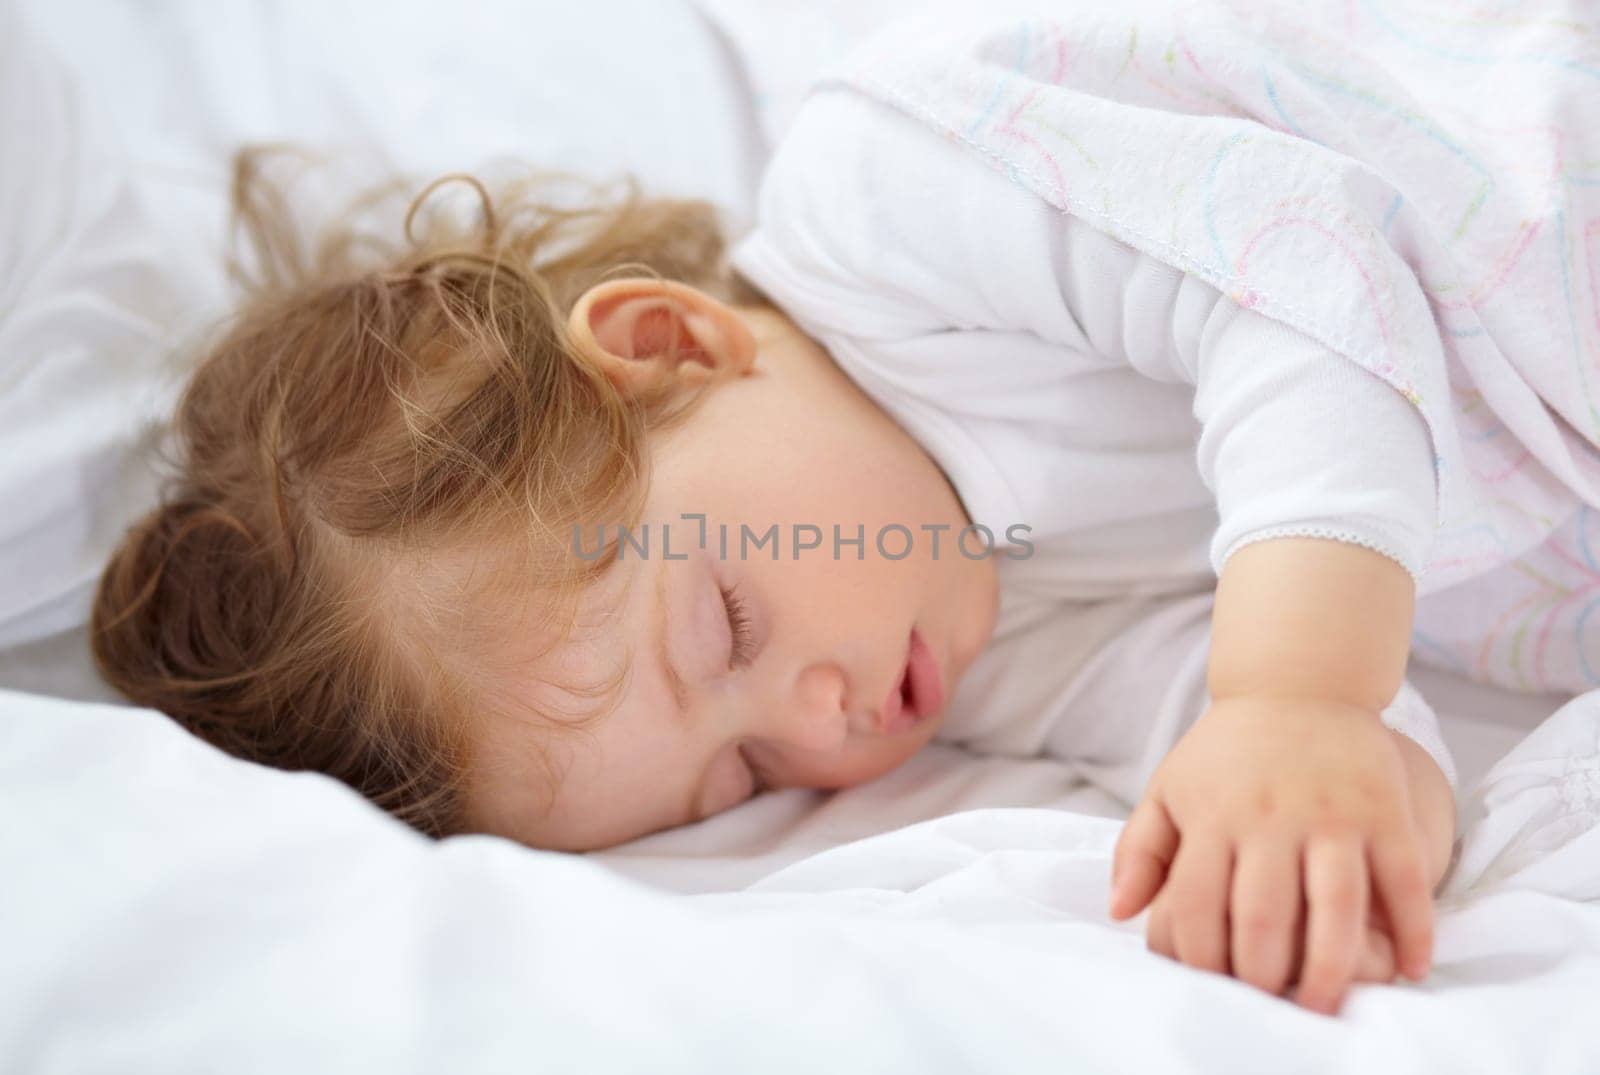 Face, baby and kid sleeping on bed for calm break, peace and dreaming to relax at home. Tired young child asleep with blanket for newborn development, healthy childhood growth or rest in nursery room.